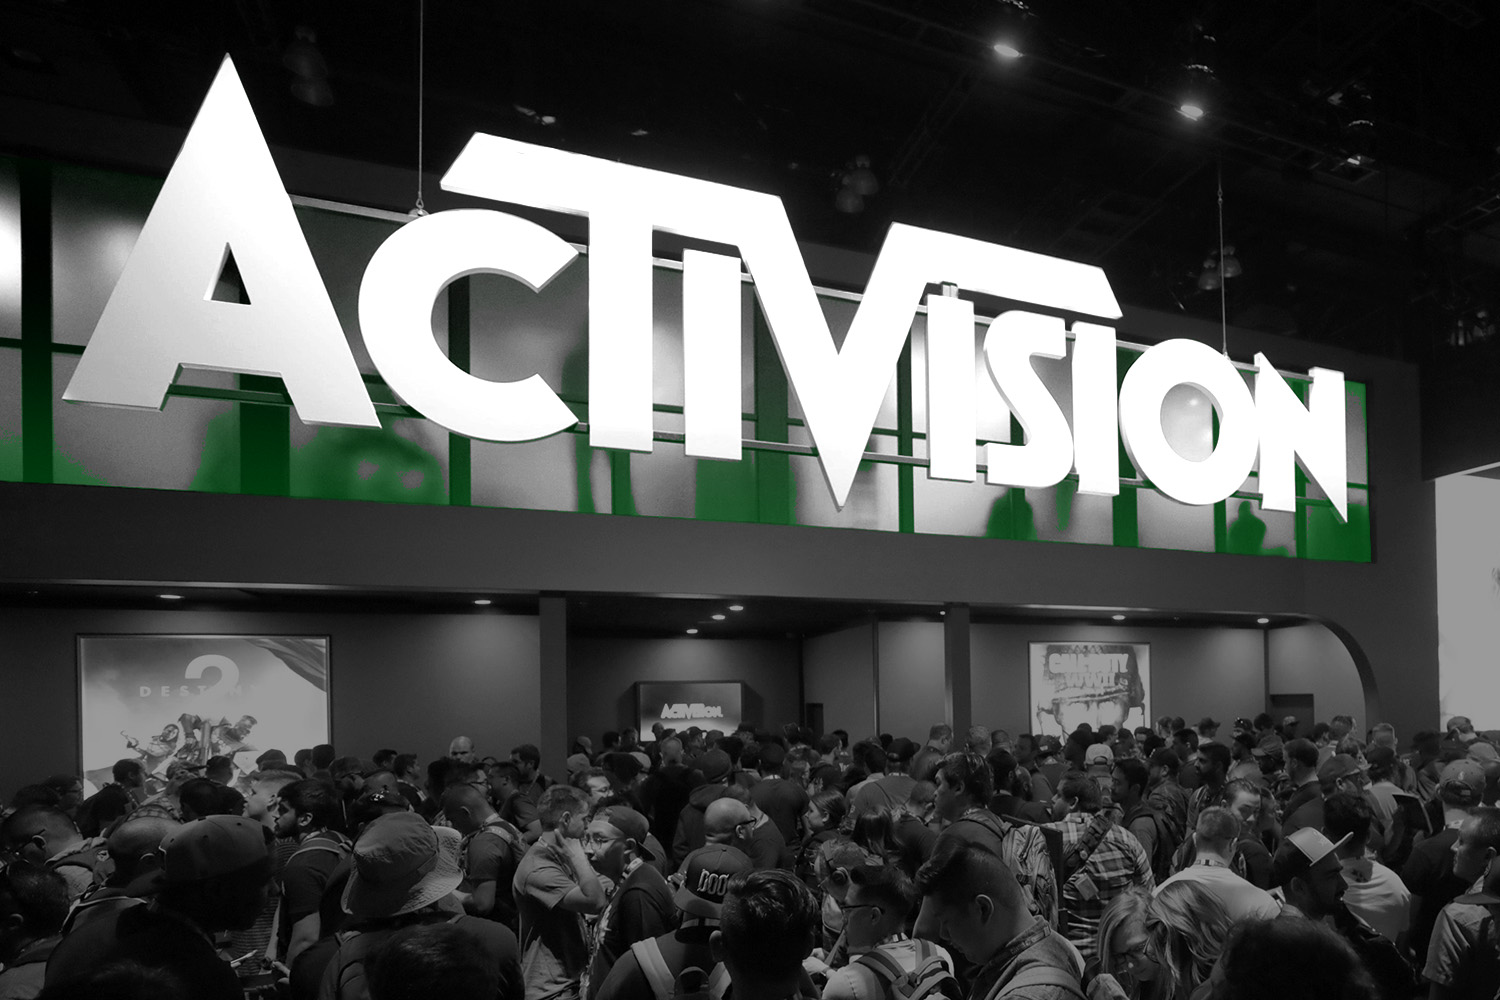 Activision Blizzard Plans Titles for Xbox Game Pass After Microsoft  Acquisition